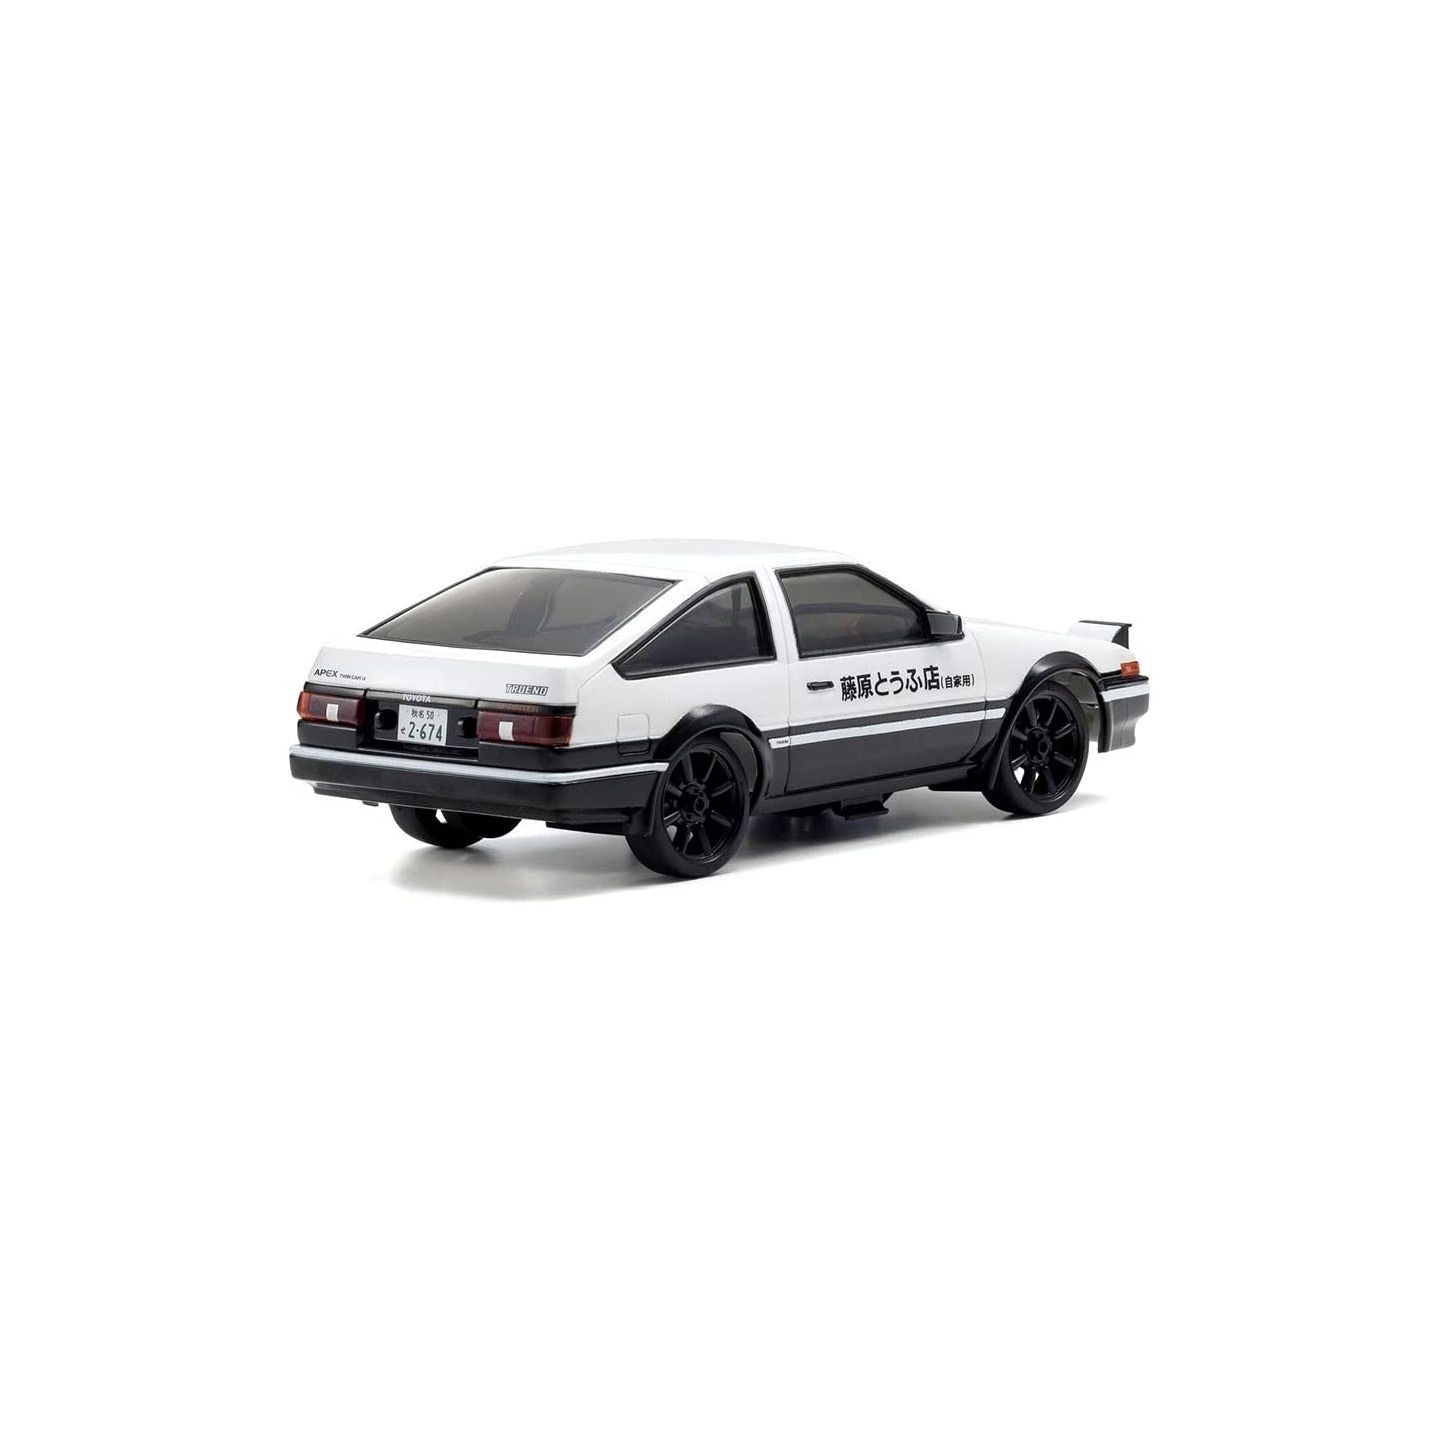 Kyosho RC Car First MINI-Z Initial D Toyota Sprinter Trueno AE86 With Tracking 